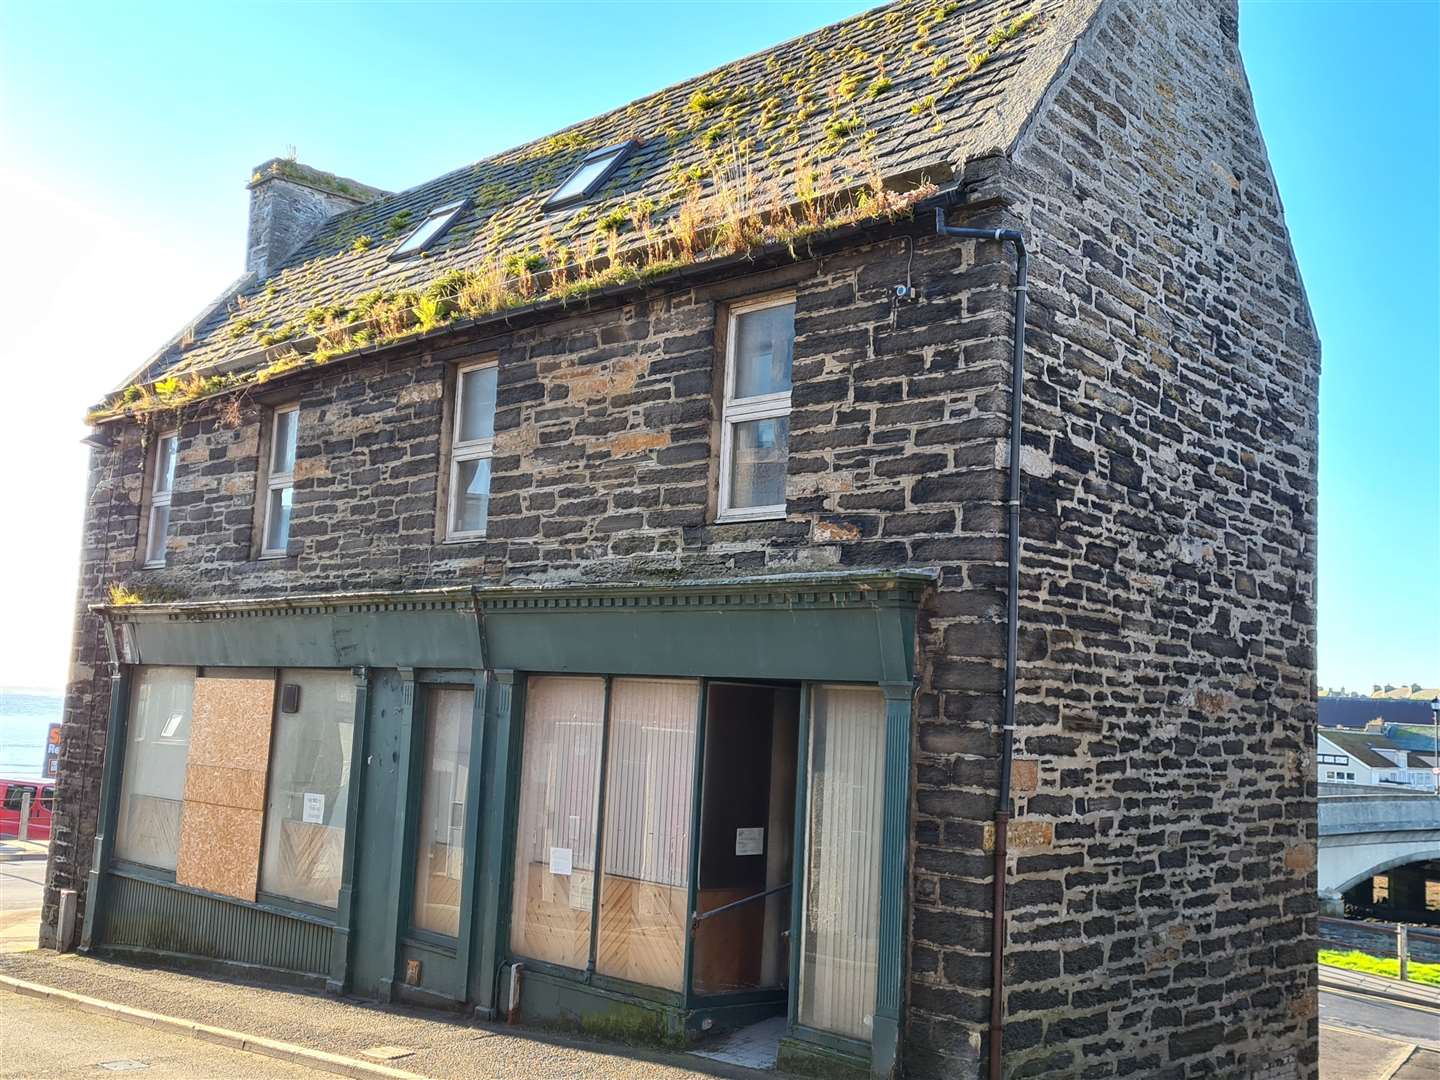 Local businessman Kevin Milkins has purchased the former social work building in Wick's High Street.